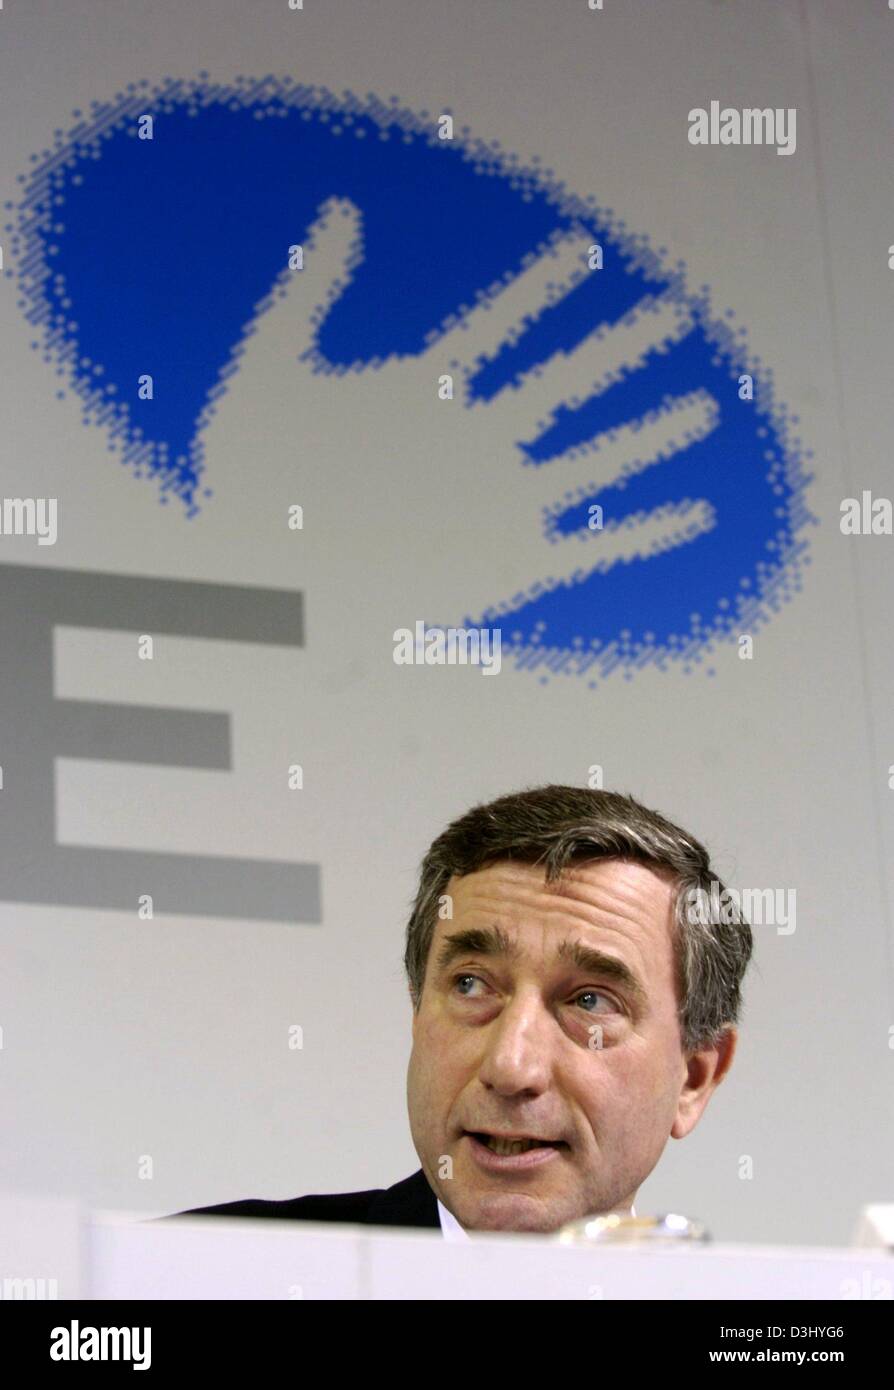 (dpa) - Harry Roels, chairman of German energy supplier RWE, smiles as he attends the balance press conference in Essen, Germany, 26 February 2004. The company announced that it wants to increase its business results and dividends within the coming years and that the surplus is expected to increase by a two-digit percentage number. RWE also announced further cost saving measures. T Stock Photo